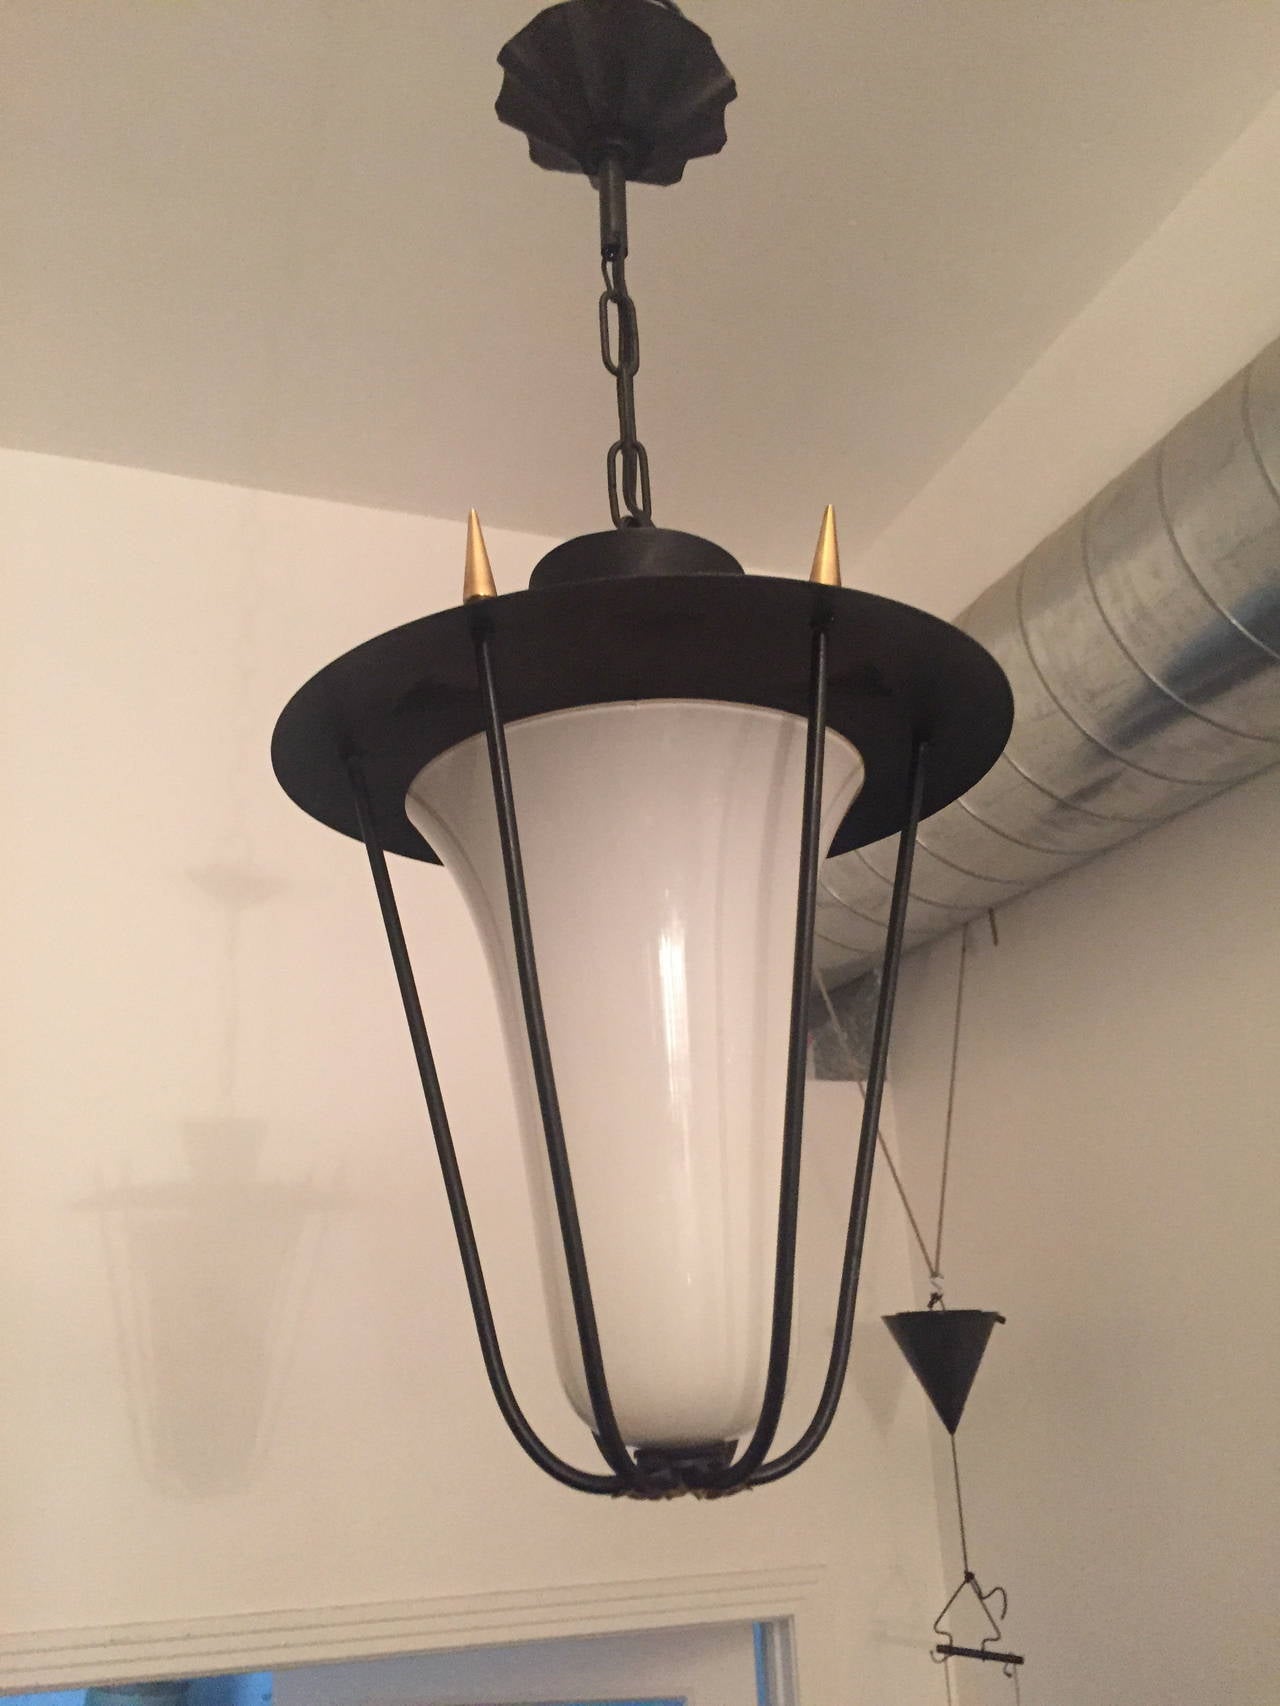 A great 1950s French hanging light done in matte black enamel and a gold decorative element body with a white opaline glass shade. 150 watt socket. The chain can be made longer if needed.